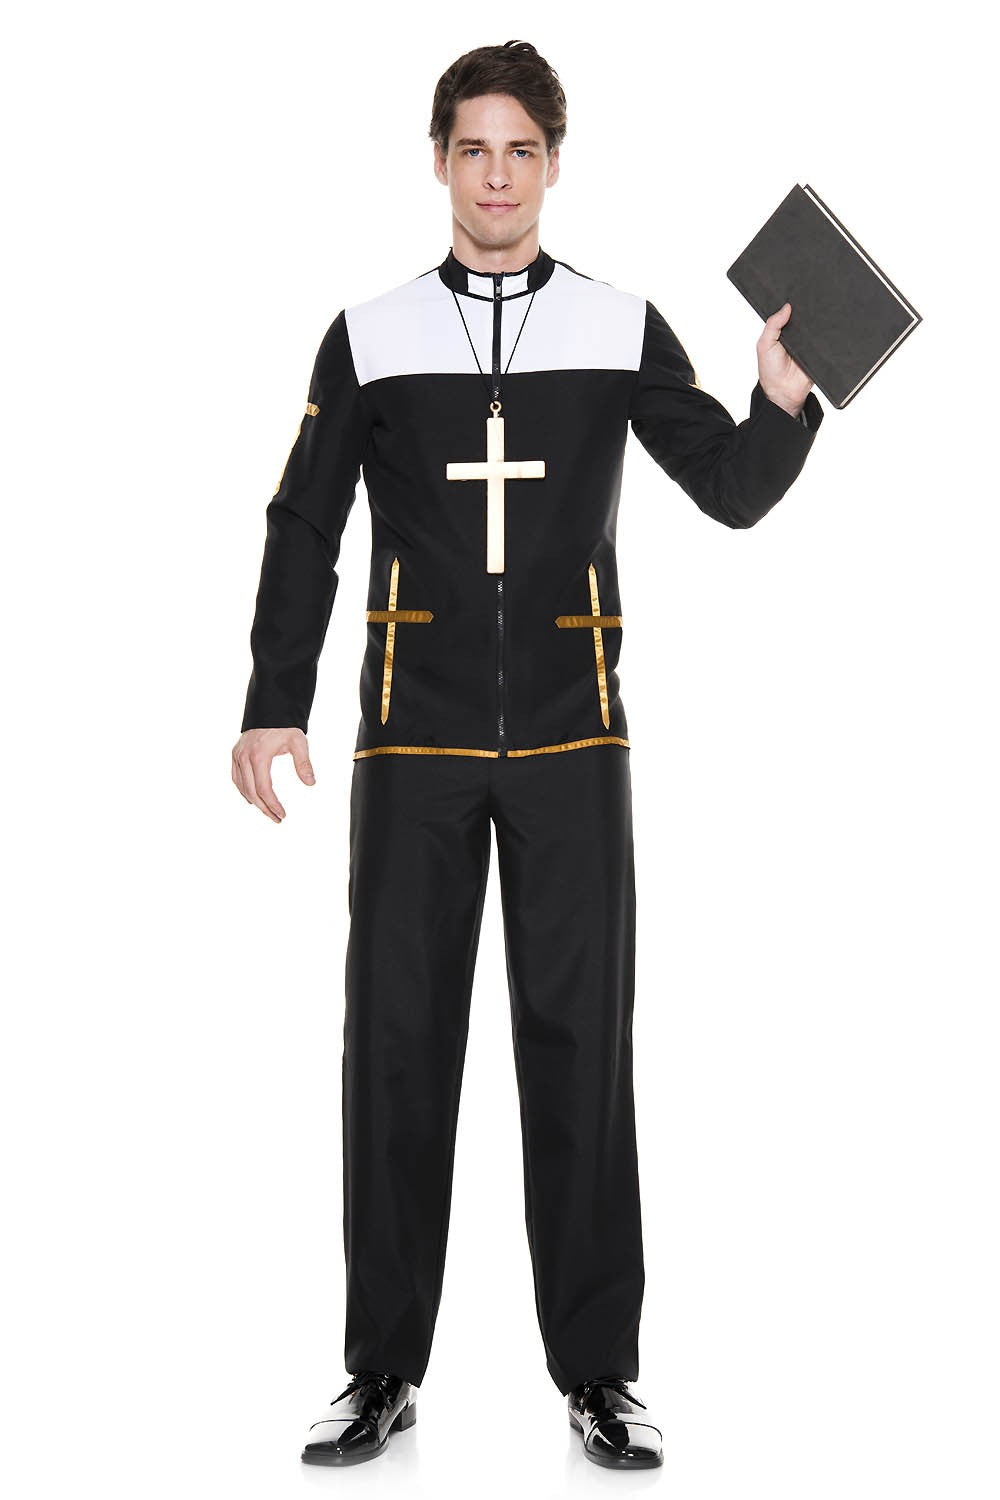 Congressional Preacher Men Costume by Music Legs only at  TeeJayTraders.com